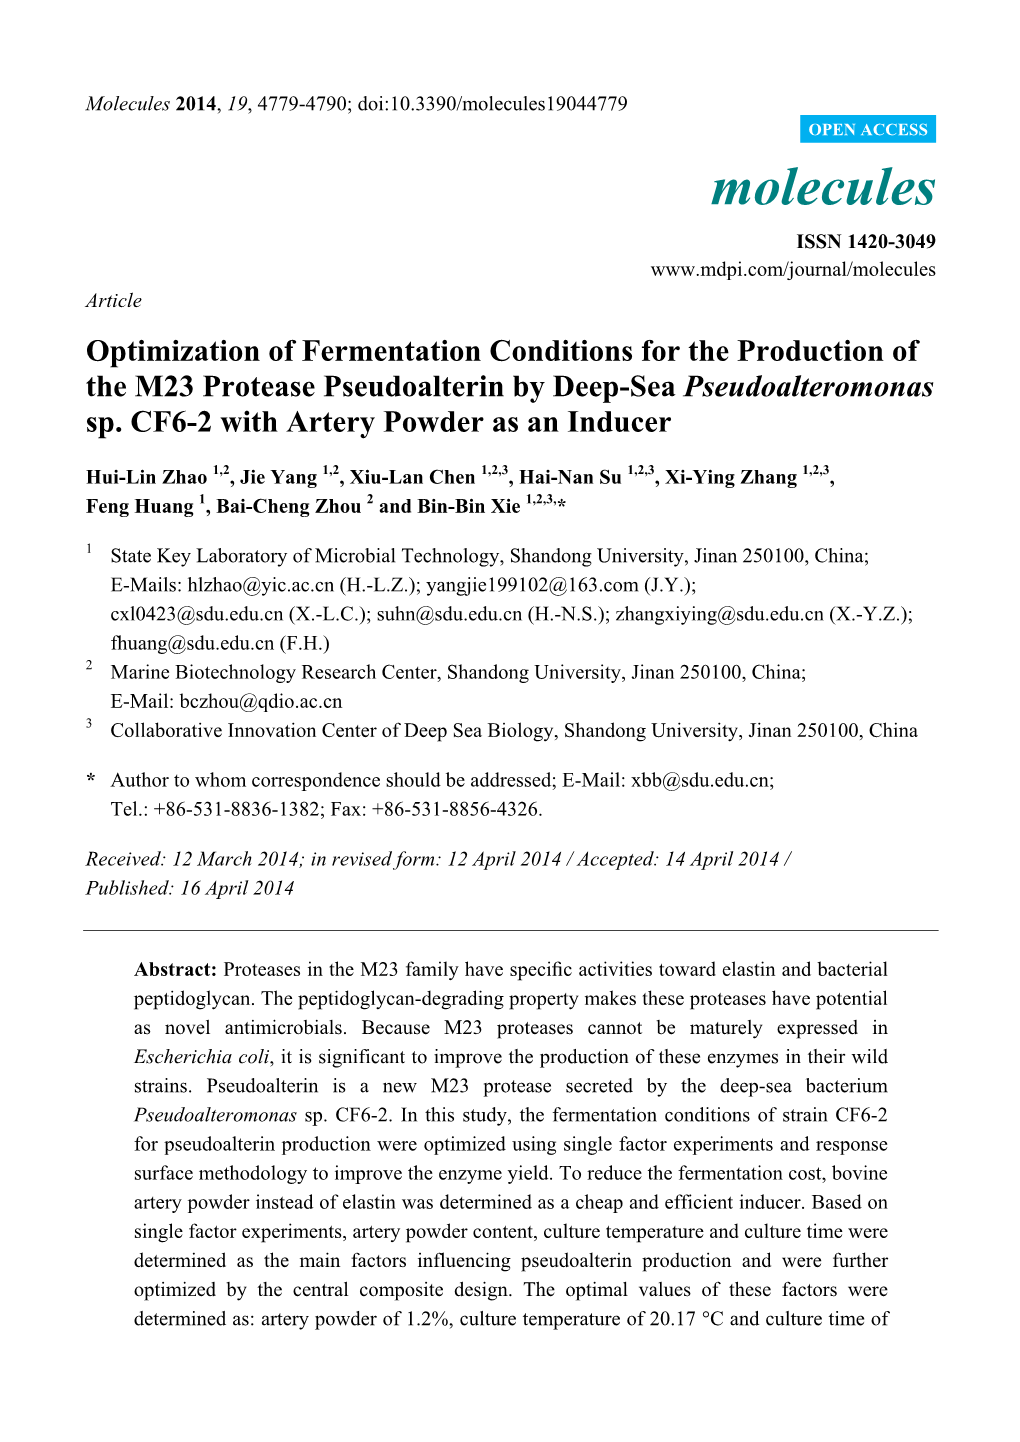 Optimization of Fermentation Conditions for the Production of the M23 Protease Pseudoalterin by Deep-Sea Pseudoalteromonas Sp